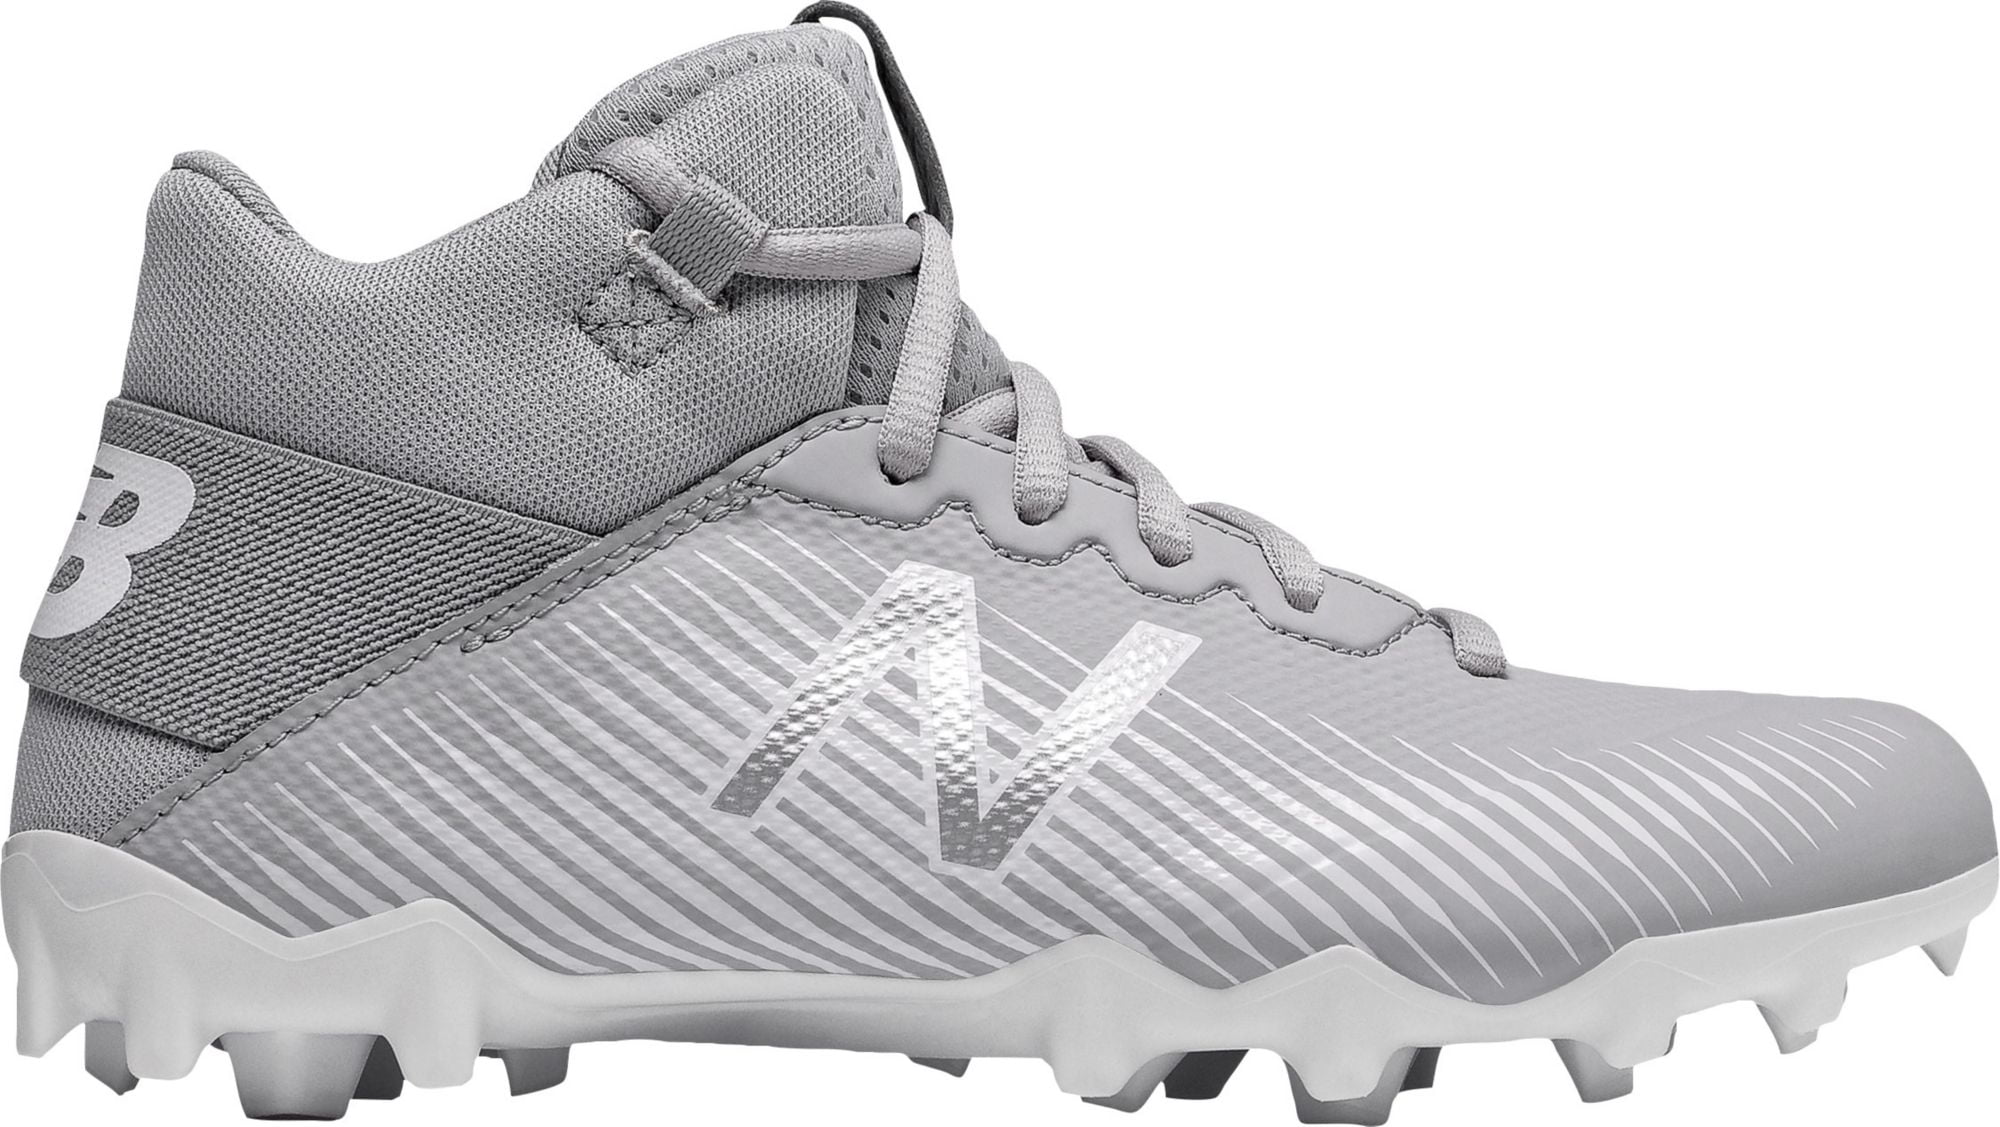 youth boys lacrosse cleats